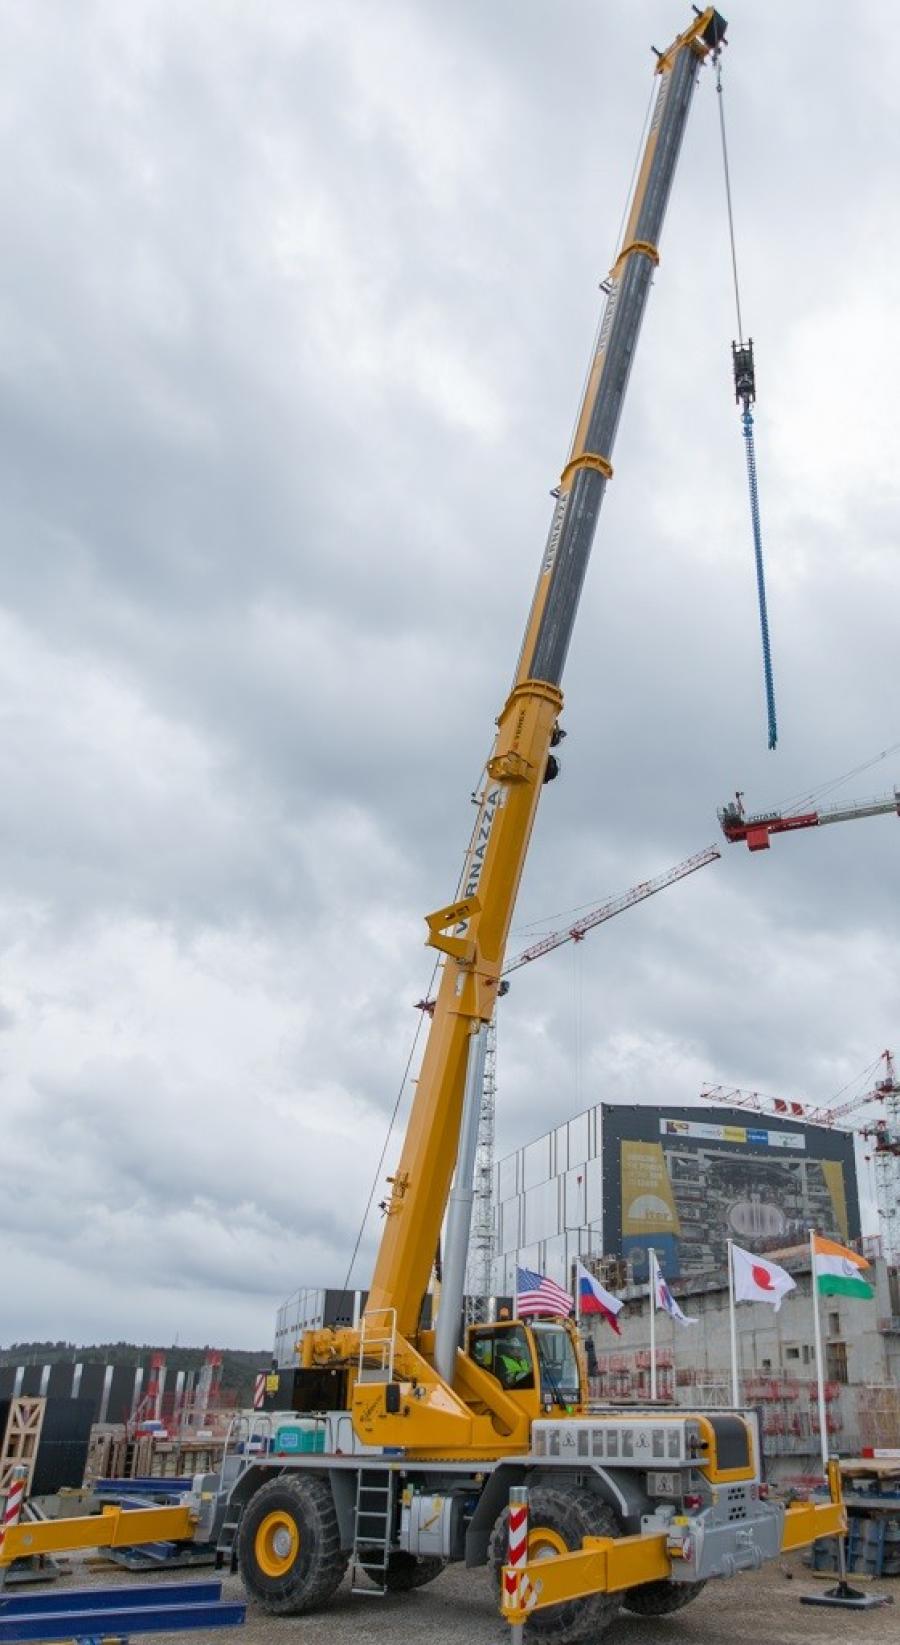 While on the construction site, the RT 90 is required to lift loads weighing up to 66 tons (60 t) at radii of 39 to 115 ft. (12 to 35 m).